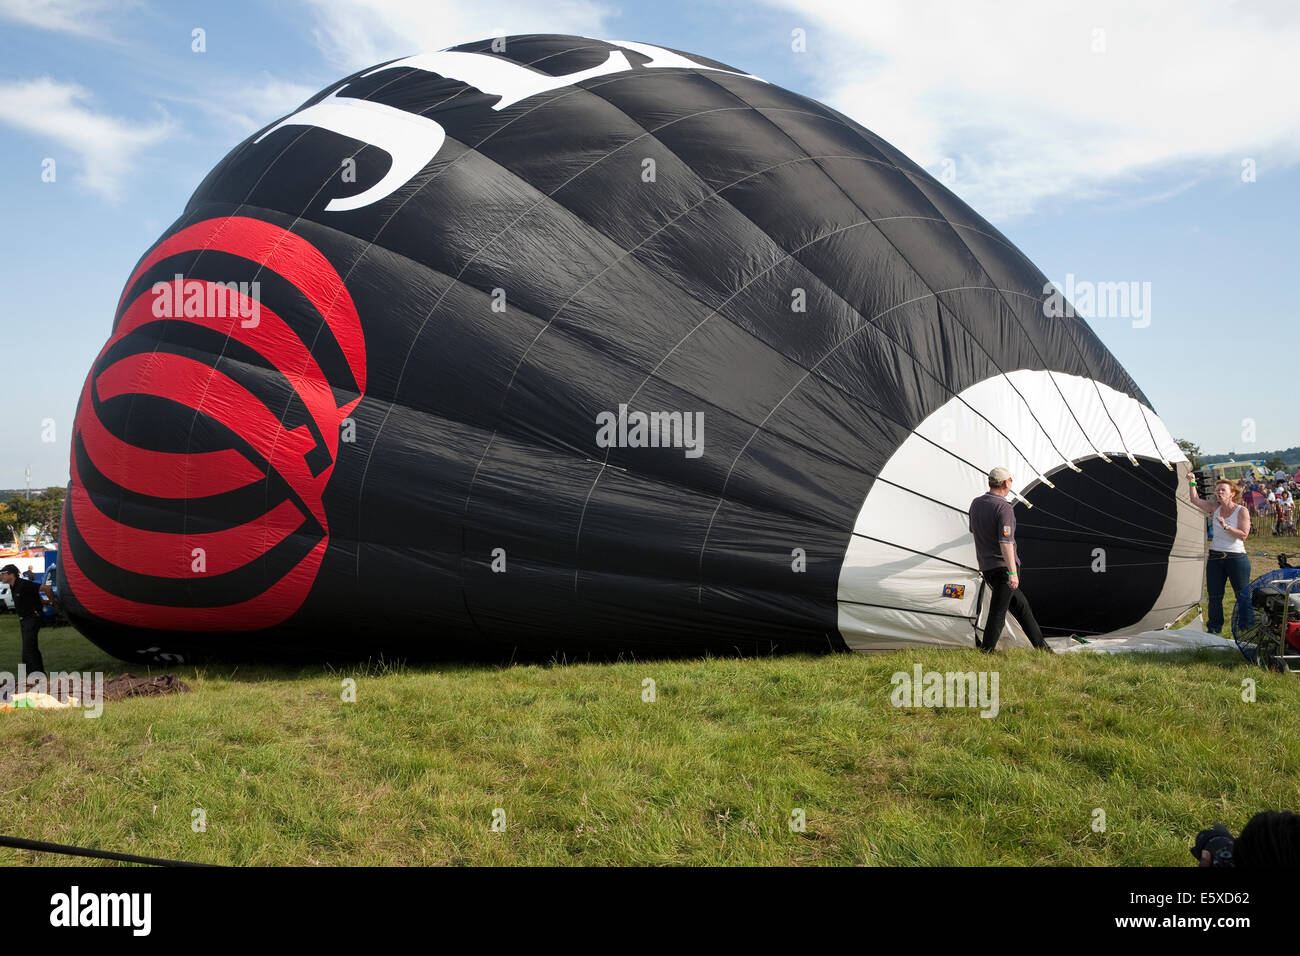 Bristol, UK. 7th August, 2014. The JLL balloon starts to inflate at the Bristol International Balloon Fiesta Credit: Keith Larby/Alamy Live News Stock Photo